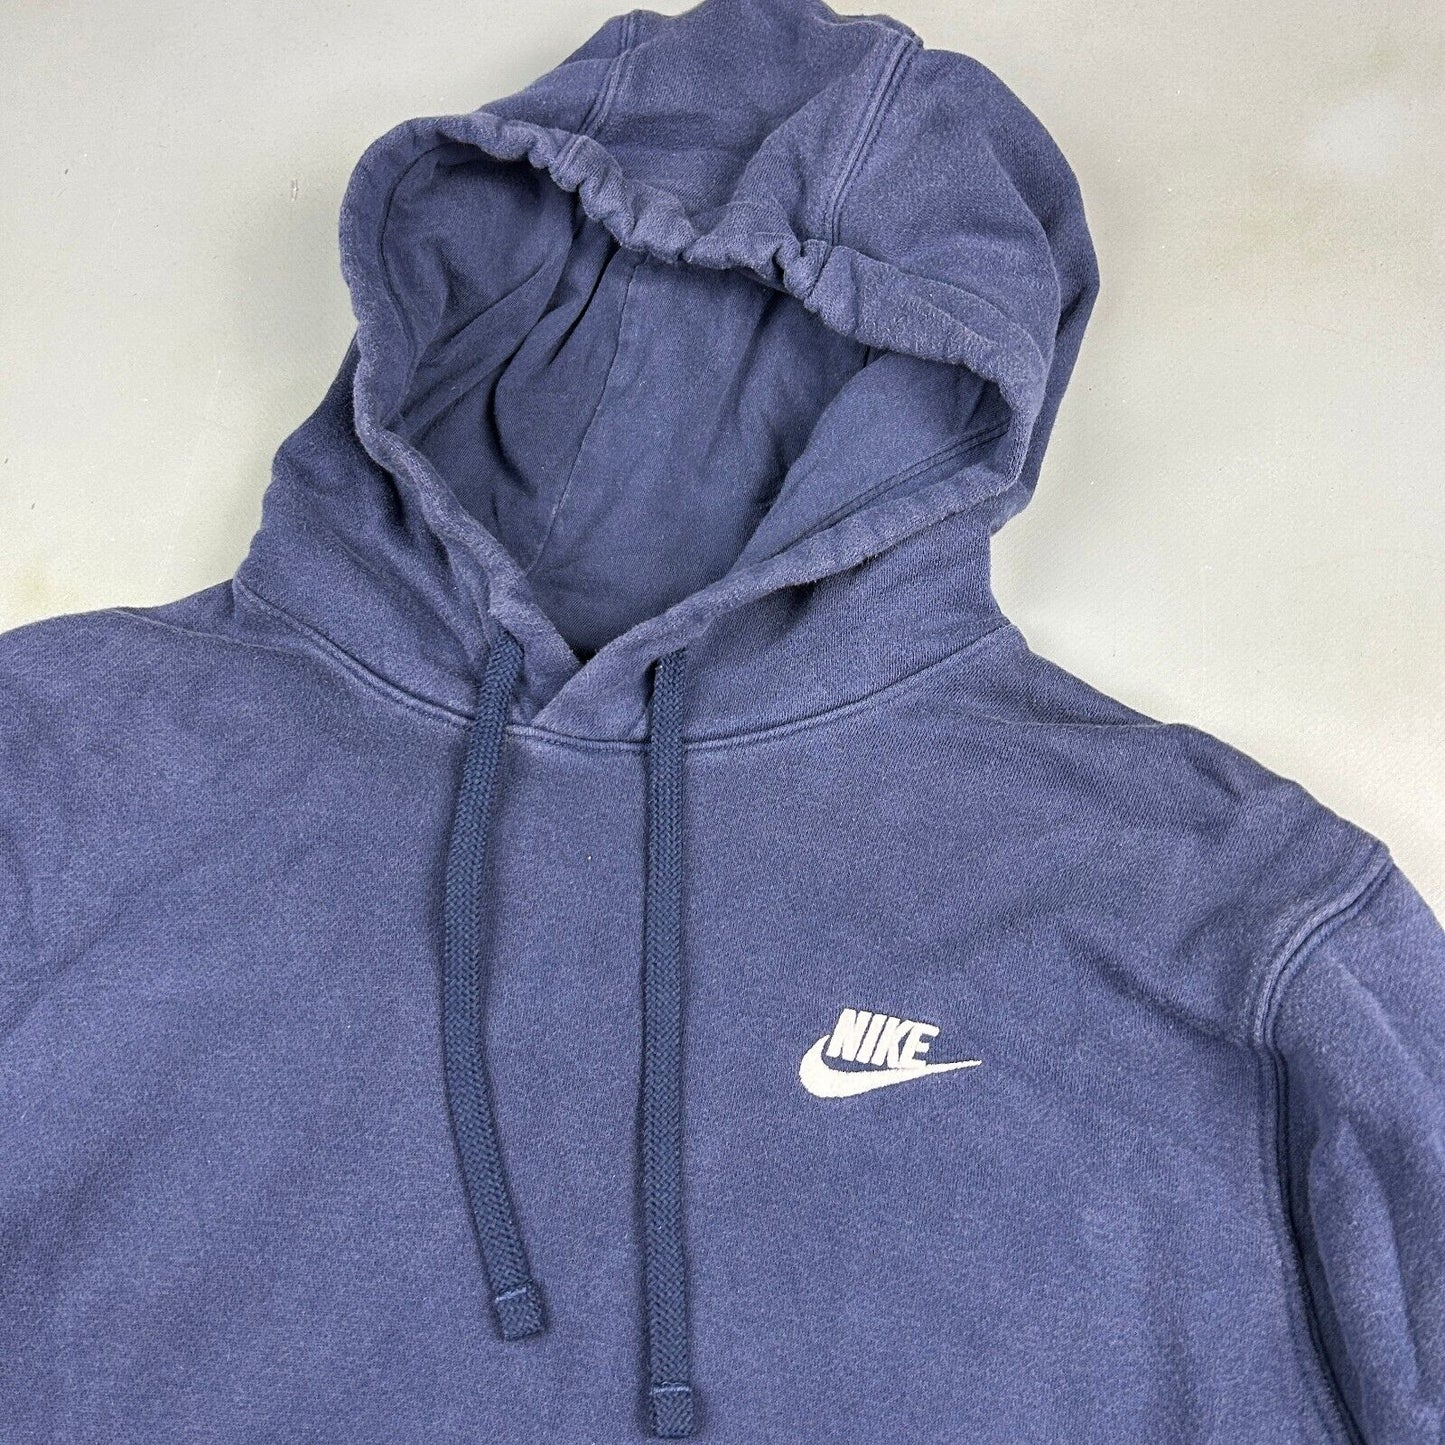 VINTAGE NIKE Embroidered Sm Logo Blue Hoodie Sweater sz Small Adult